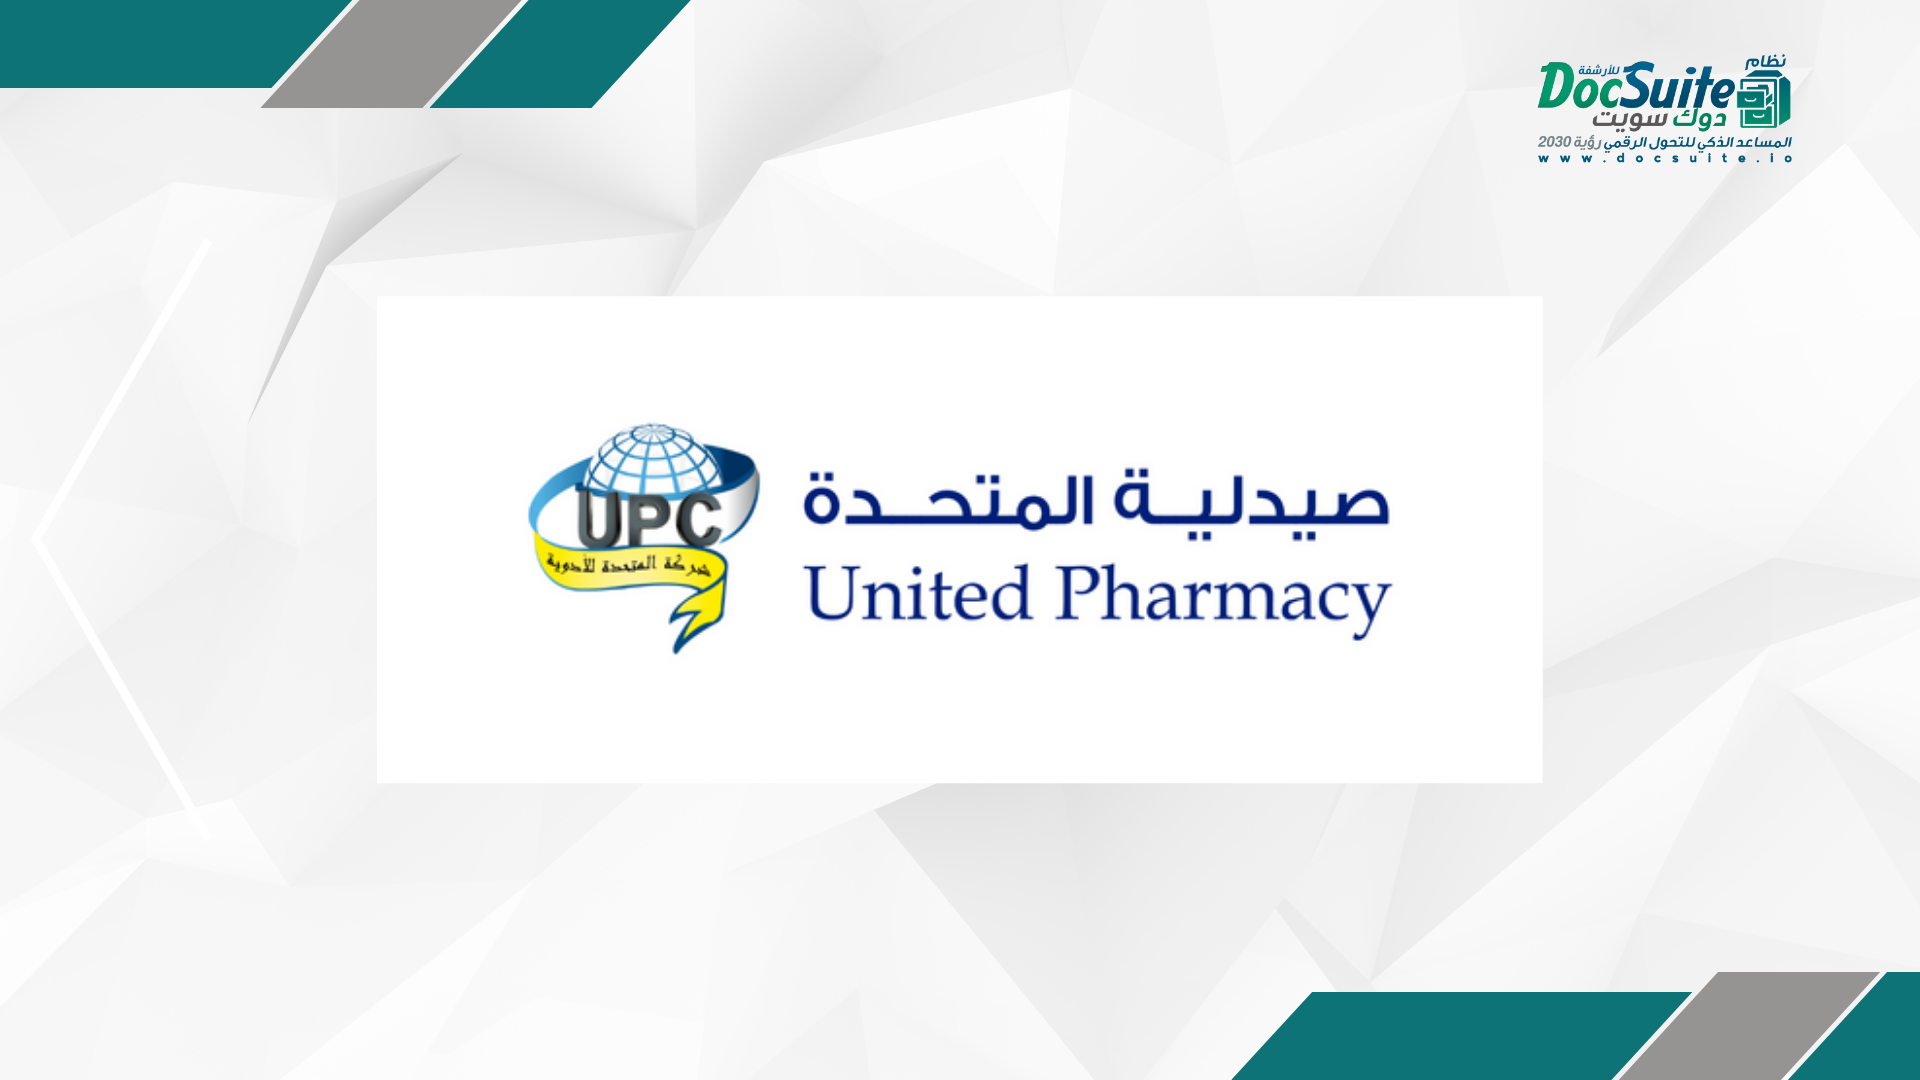 United Pharmacies Group is on the path of innovation